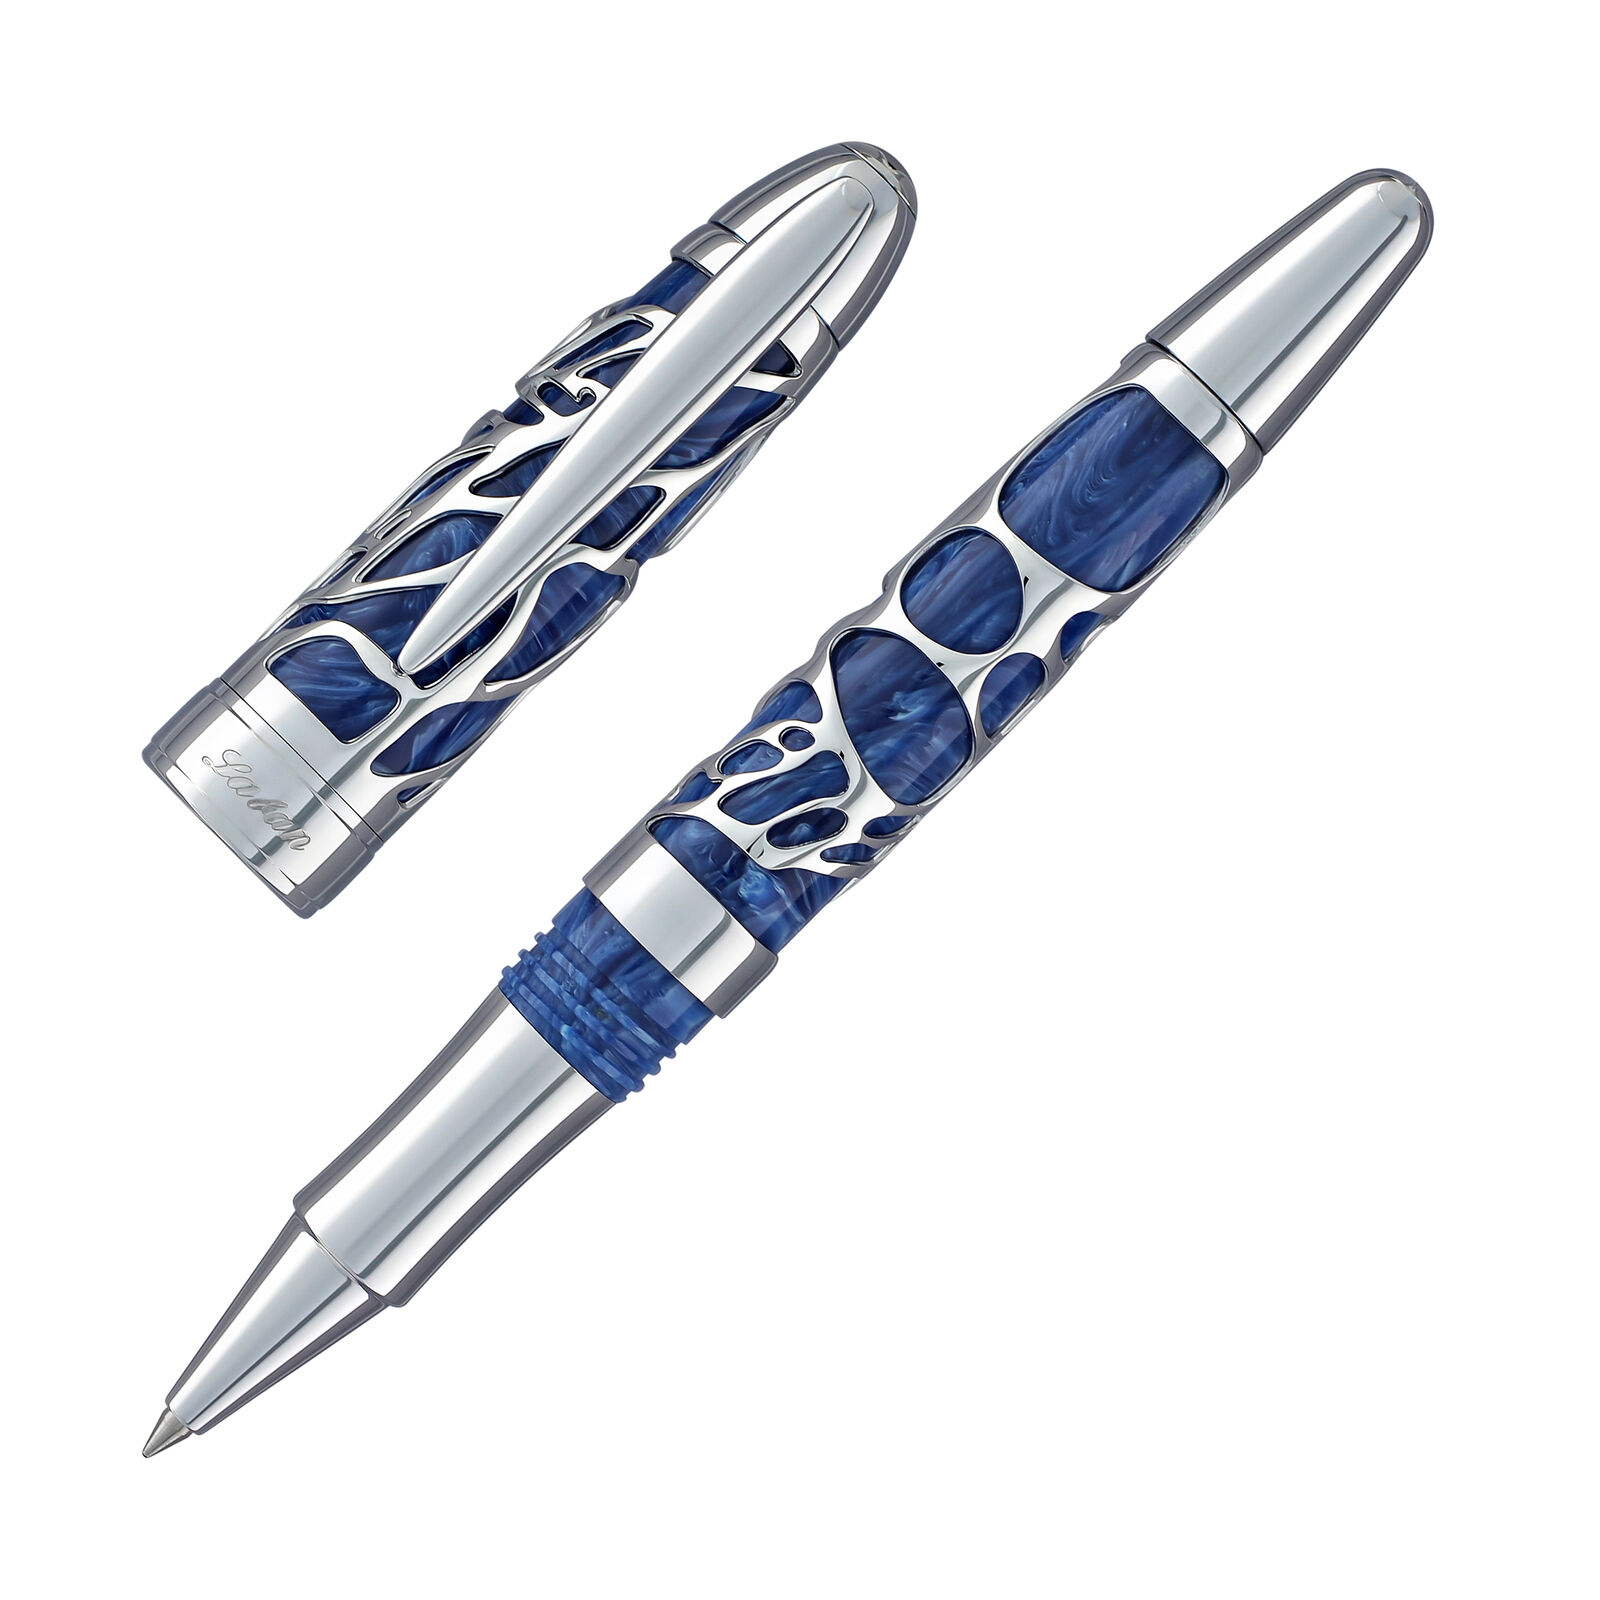 Laban Formosa Rollerball Pen in Blue Wave - NEW in Box